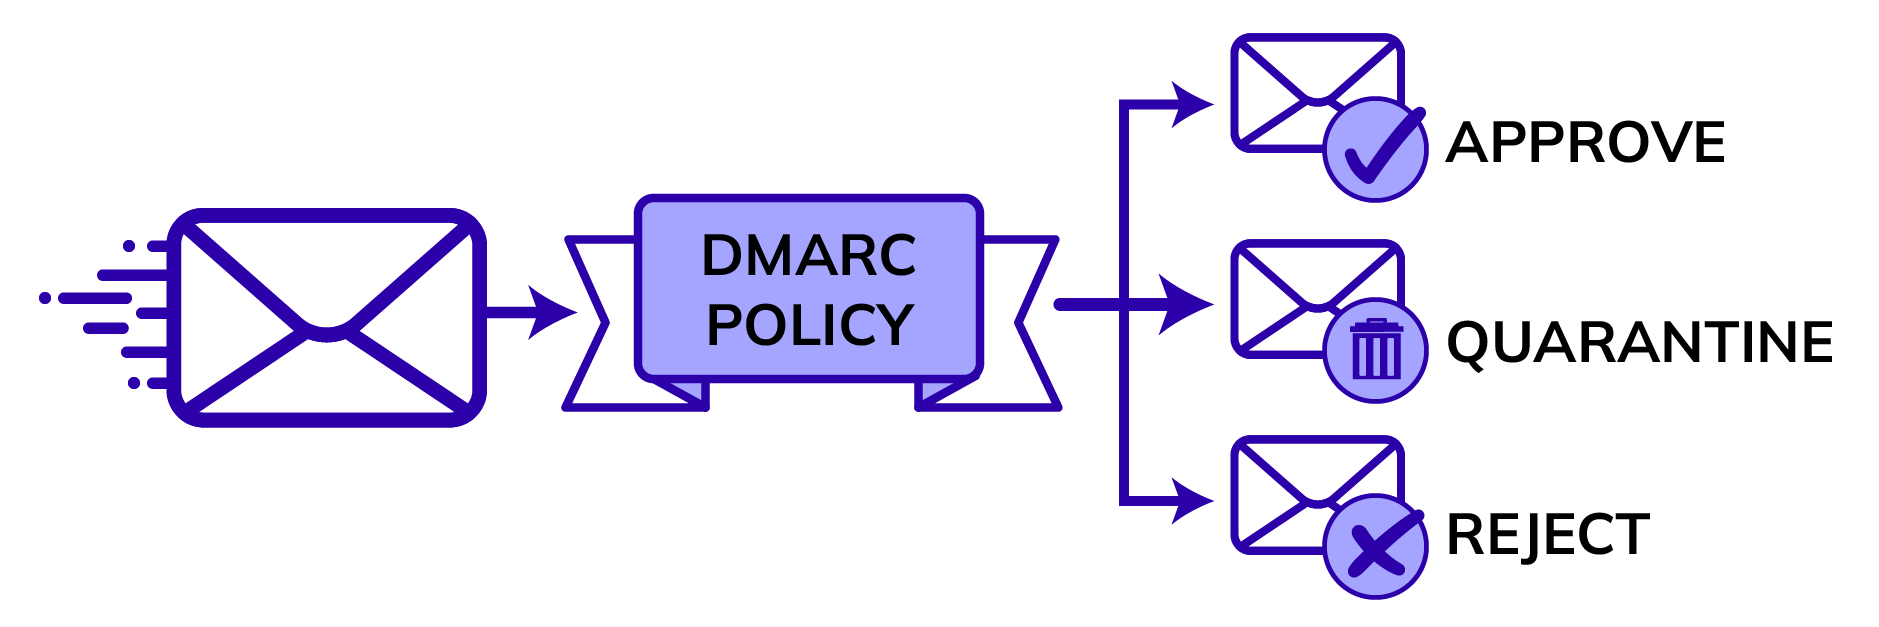 Dmarc policy